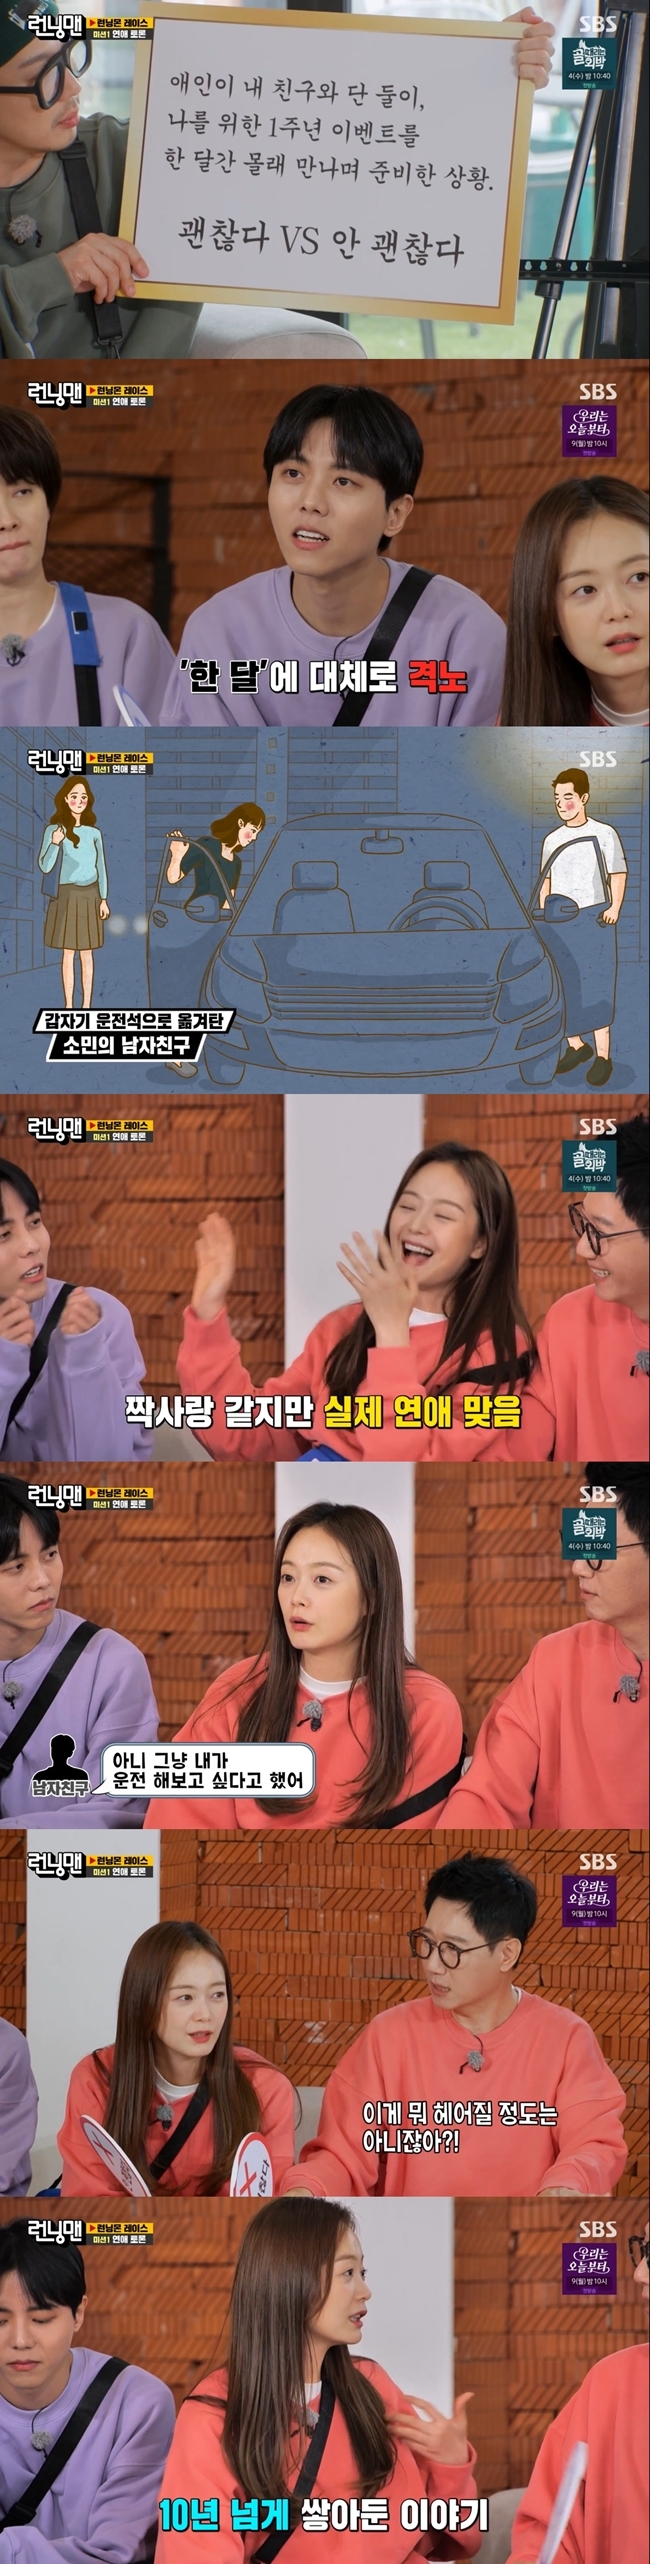 Actor Jean So-min mentioned his experience fighting a man Friend 10 years ago.SBS Running Man Running Mon Race, which was broadcast on May 1, was the first Mission to discuss love.The love debate is a topic that you can exchange opinions and then use a panel of opinions.The first topic was Its okay to have a lover who has been secretly meeting with my friend for the first anniversary event for me for a month.I think I can understand it because it was for the woman Friend, said Wooseok, who then said, Its nice.I am confident because I am good. Yoo Jae-Suk took an example as a main item and asked again, Do not get a chance. Nam Joo-hyuk suddenly came out and said, I prepared for a month.Still, Wooseok replied, But its (fine), and Haha was surprised, saying, Self-esteem is Sene.When Friend said that he was Nam Ju-hyuk, Joo-jae laughed and laughed, saying, Stop talking about Nam Ju-hyuk.If you rehearse for a month, you will be immersed. At the end of the crew asking them to present a situation that could be disputed directly, Jean So-min said, Can I actually do it? I have Baro to remind you, I fought a lot in the old days because of this.Jean So-min said, The man Friend is playing with several Friends, including Ada Lovelacechin, and he comes to pick me up in Ada Lovelacechin.I saw Friend twice, so I said it was okay. At that time, my house was Sangam and the friend house was Ilsan, and the man dropped me off and said that the man Friend was going well.Then the man Friend drove, and Ada Lovelacechin moved to the passenger seat. I was so angry, but I put up with it. I told him I was in a bad mood, and I wanted to stop by the office because I had something to get from Ada Lovelacechin, and I just wanted to drive the car.I asked why I changed my seat and I did not understand me. Ji Suk-jin said, Its not enough to break up? And Jean So-min said, Its been over 10 years and I still have it in my heart.